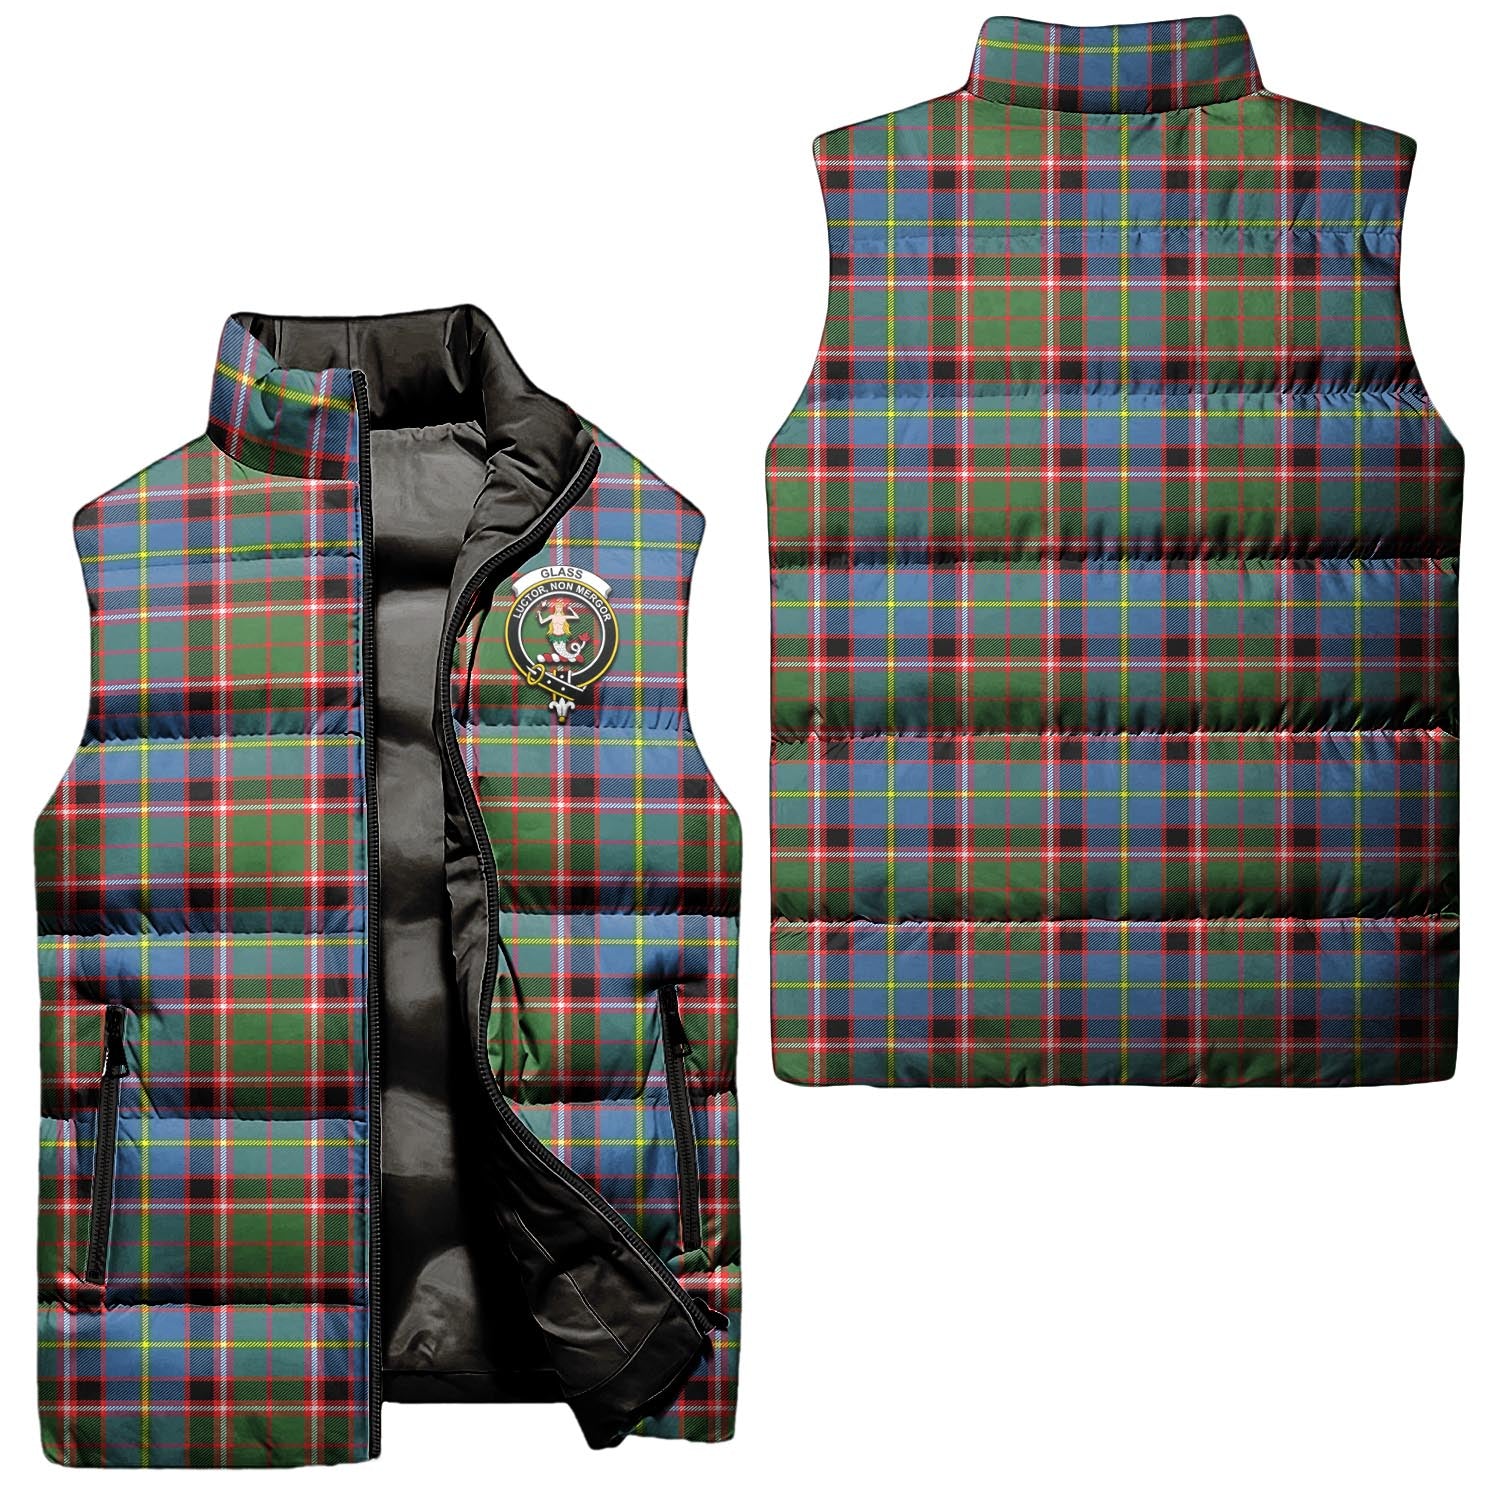 glass-clan-puffer-vest-family-crest-plaid-sleeveless-down-jacket